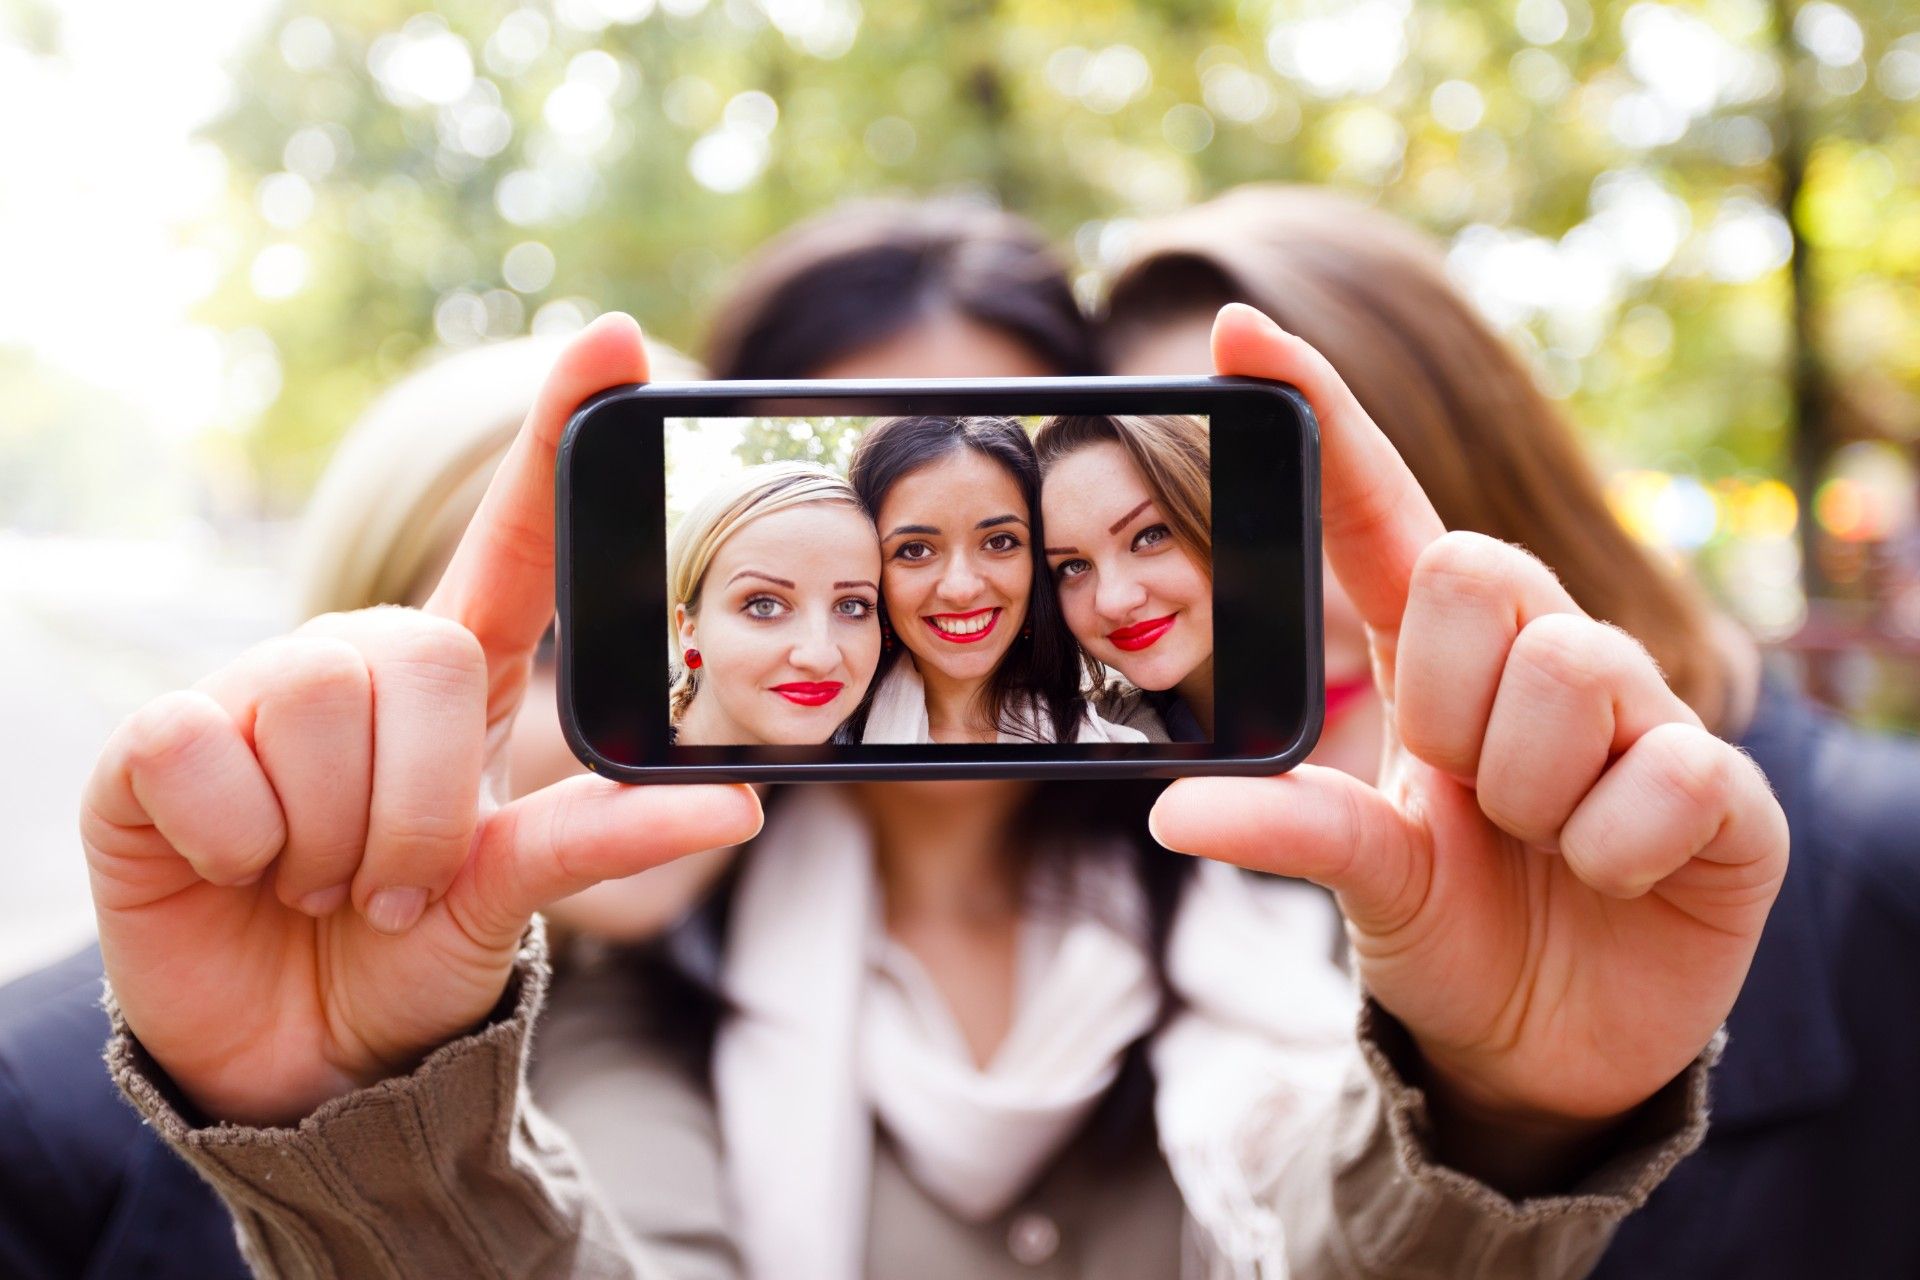 Three women in red lipstick take a selfie as shown on a smartphone screen - Instagram photos